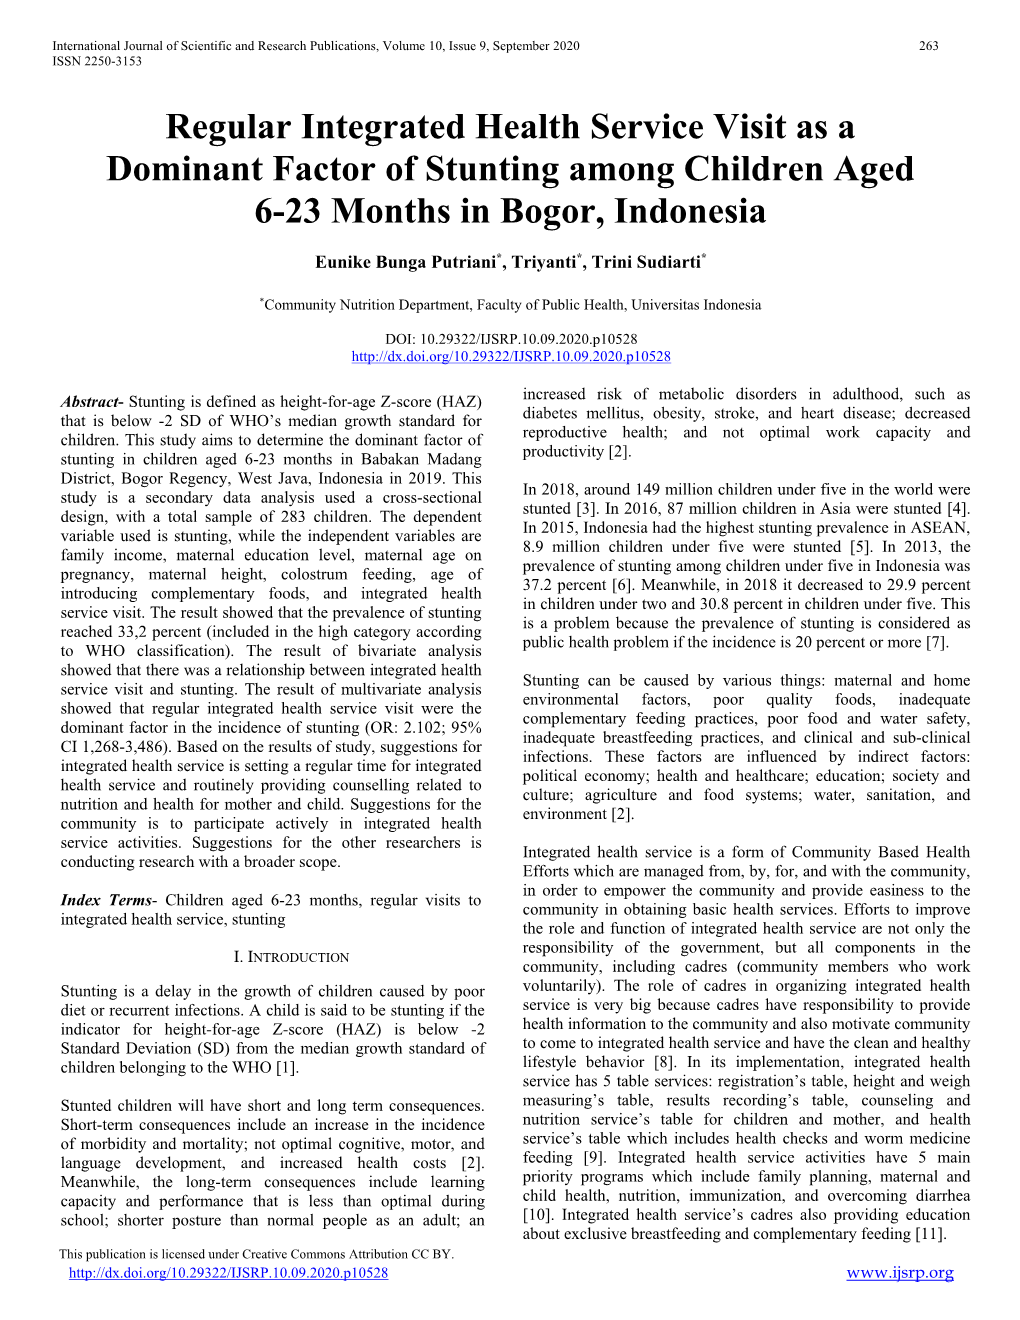 Regular Integrated Health Service Visit As a Dominant Factor of Stunting Among Children Aged 6-23 Months in Bogor, Indonesia